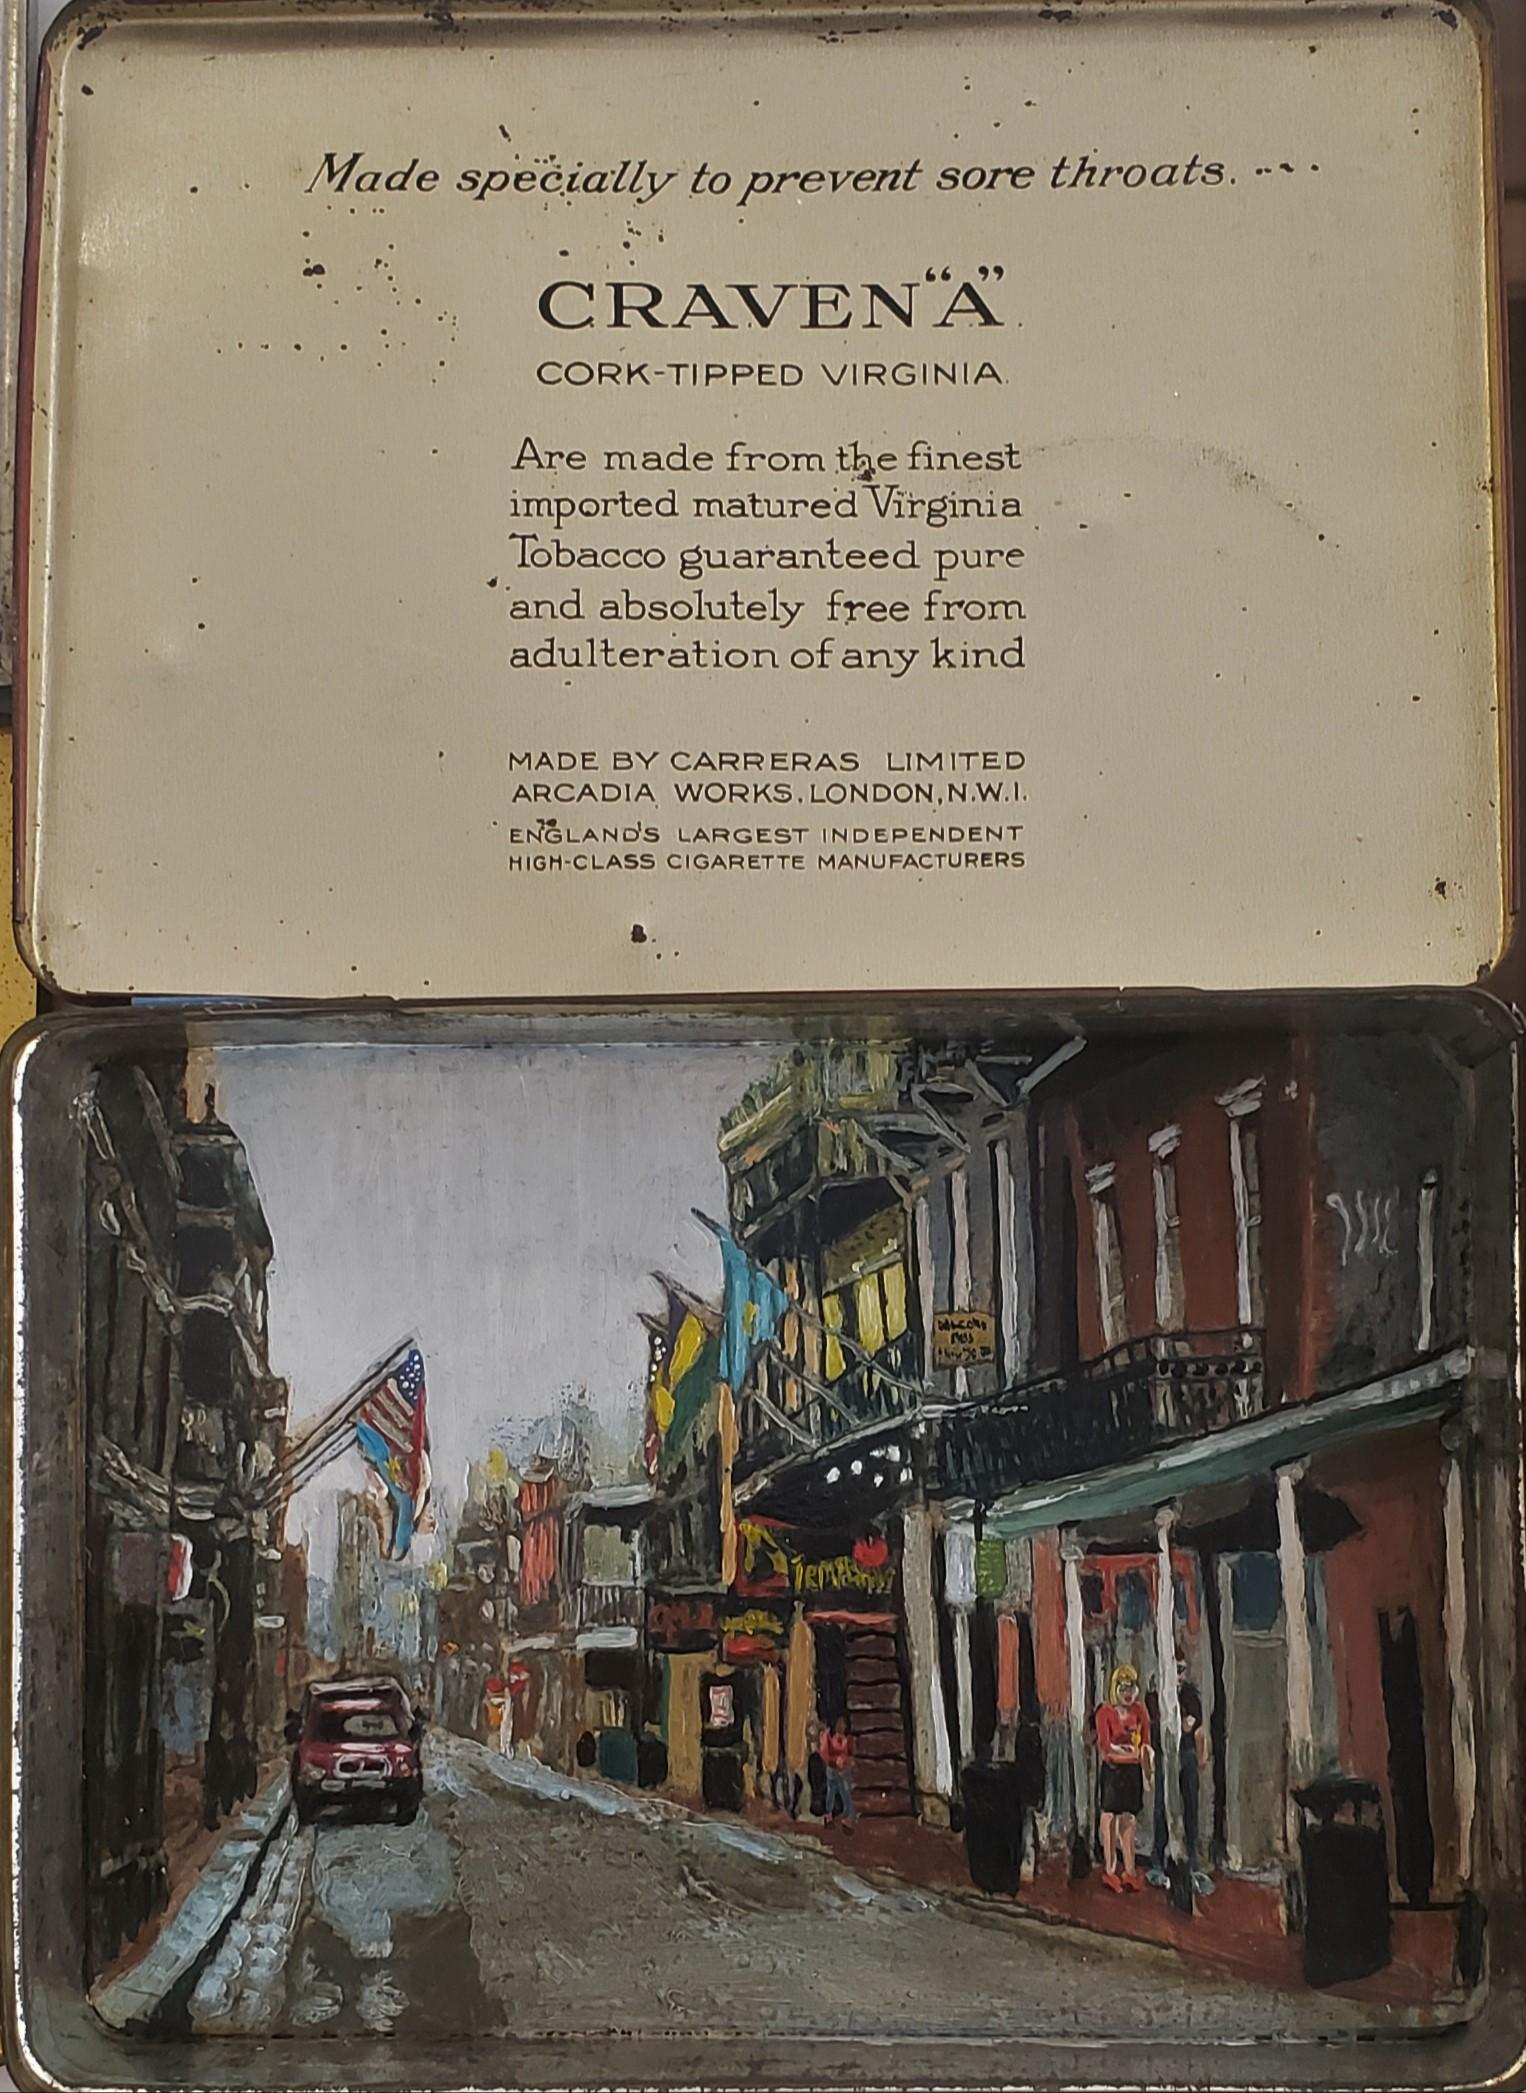   Craven  A Tobacco Tin, painted antique tobacco tins, New Orleans Street Scenes - Mixed Media Art by Michael O'Briant